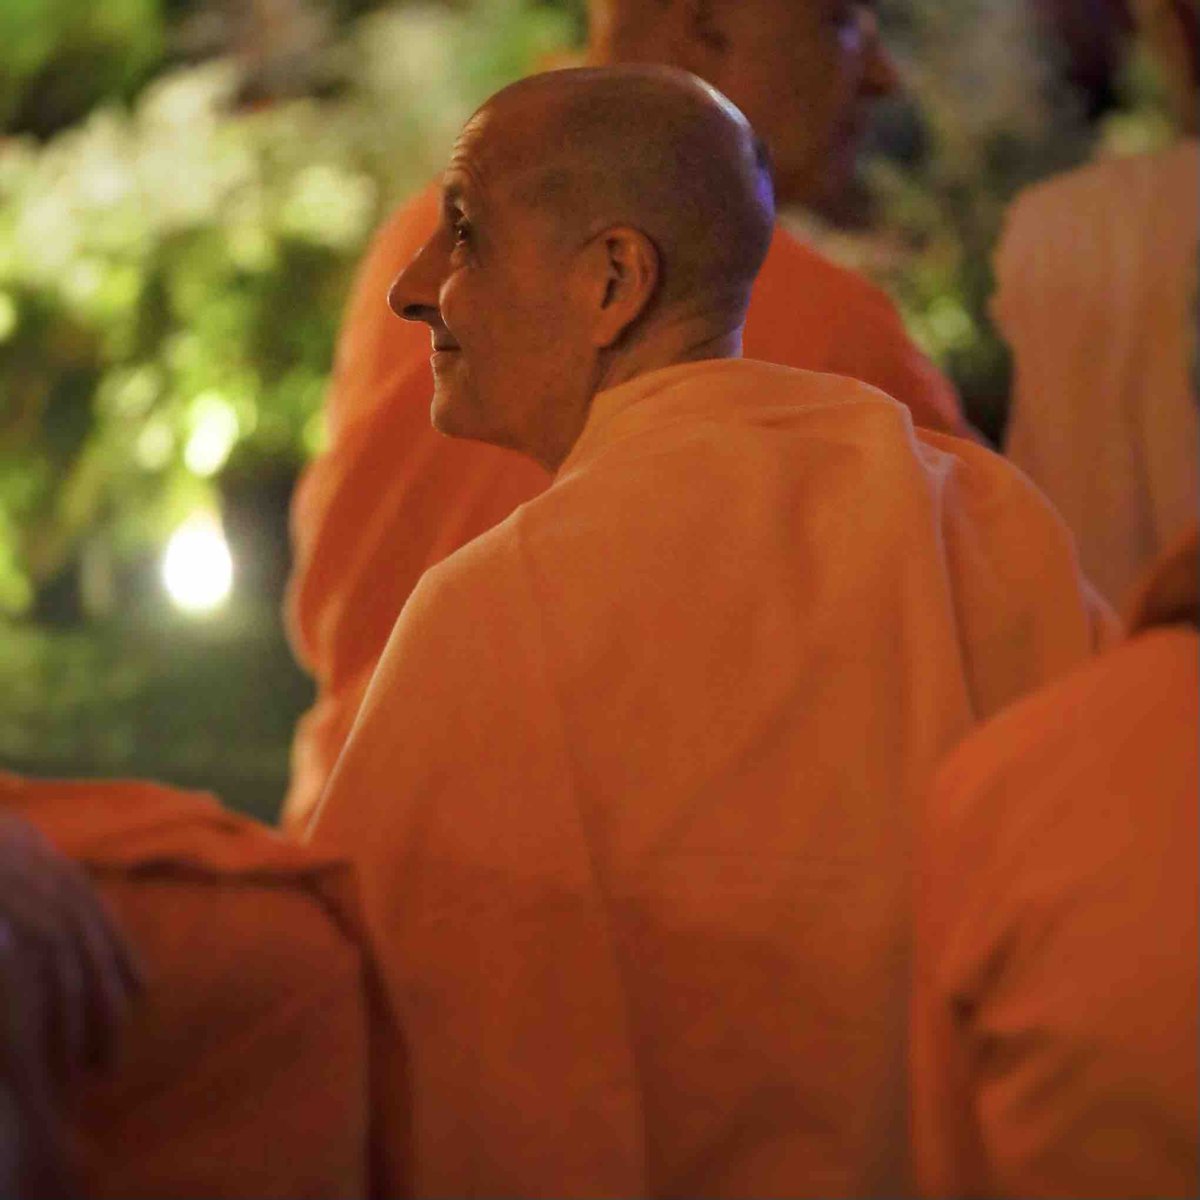 “If we have strong desires then God miraculously removes obstacles and gives us the power to overcome them.” - His Holiness Radhanath Swami #miracles #power #radhanathswami